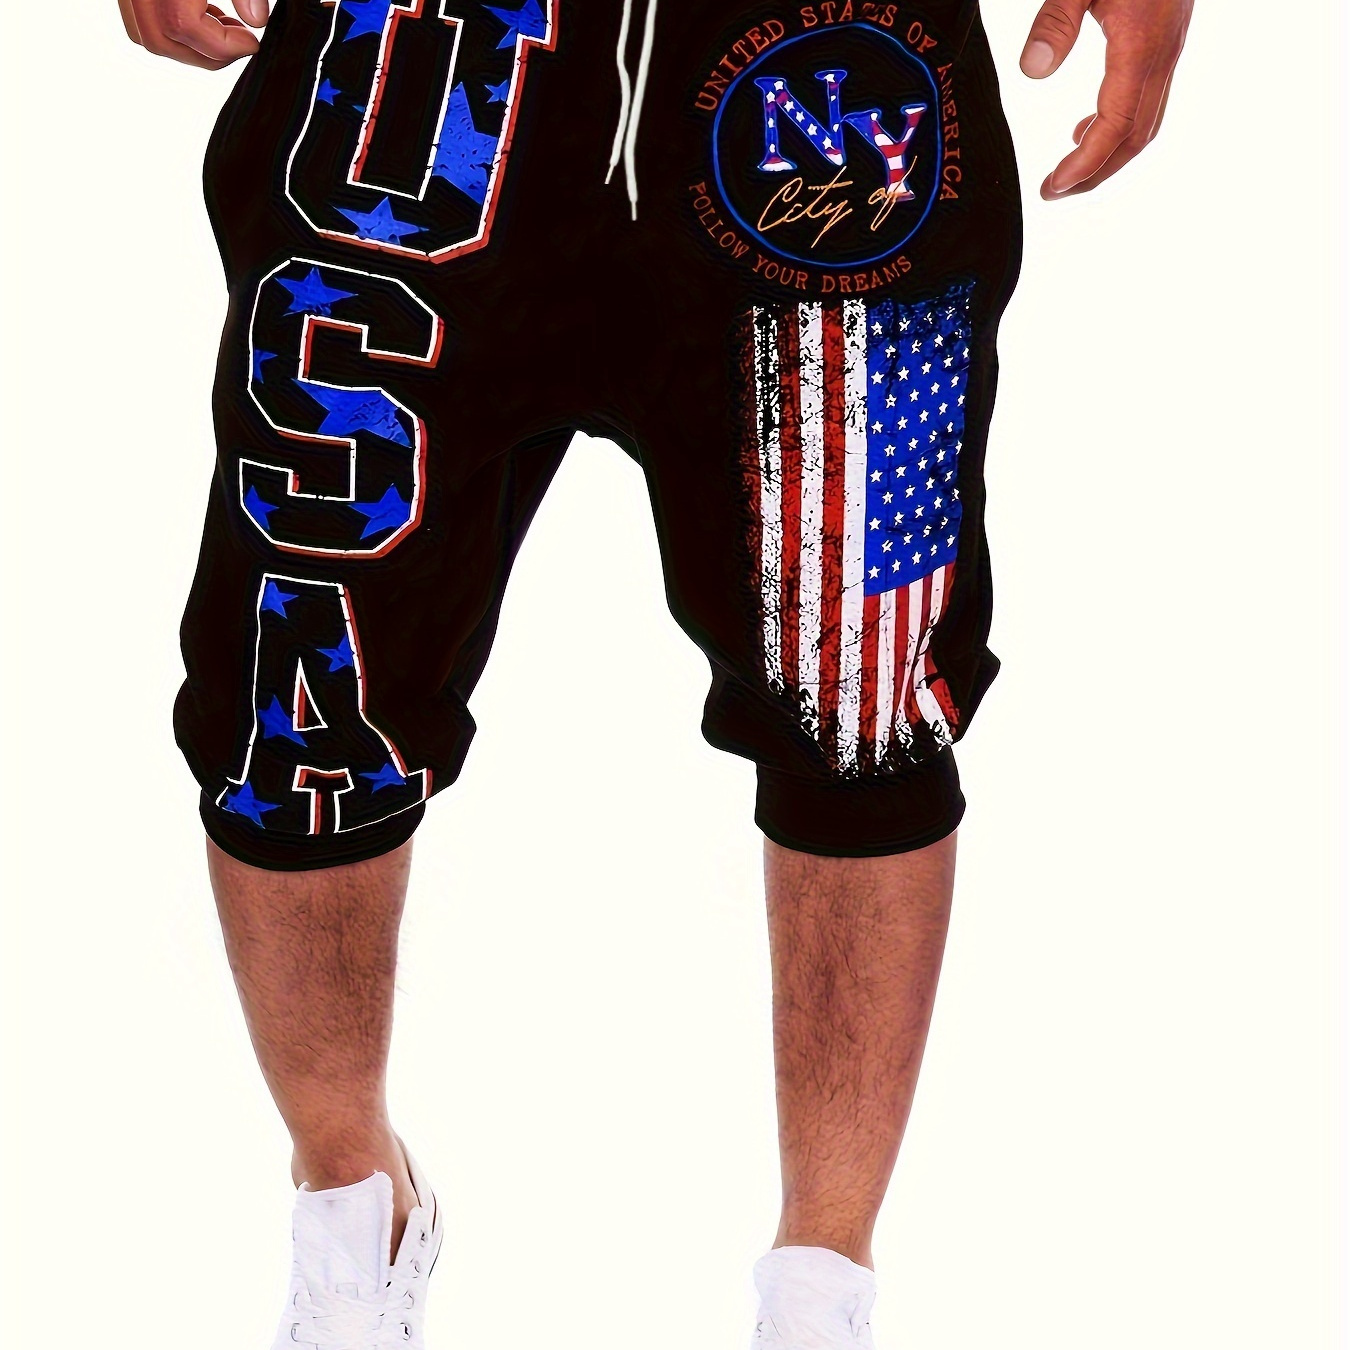 

1pc, Men's American Flag Pattern And Letter Print "usa" Capri Pants With Drawstring And Pockets, Chic And Stylish Comfy Shorts For Summer Outdoors And Sports Wear